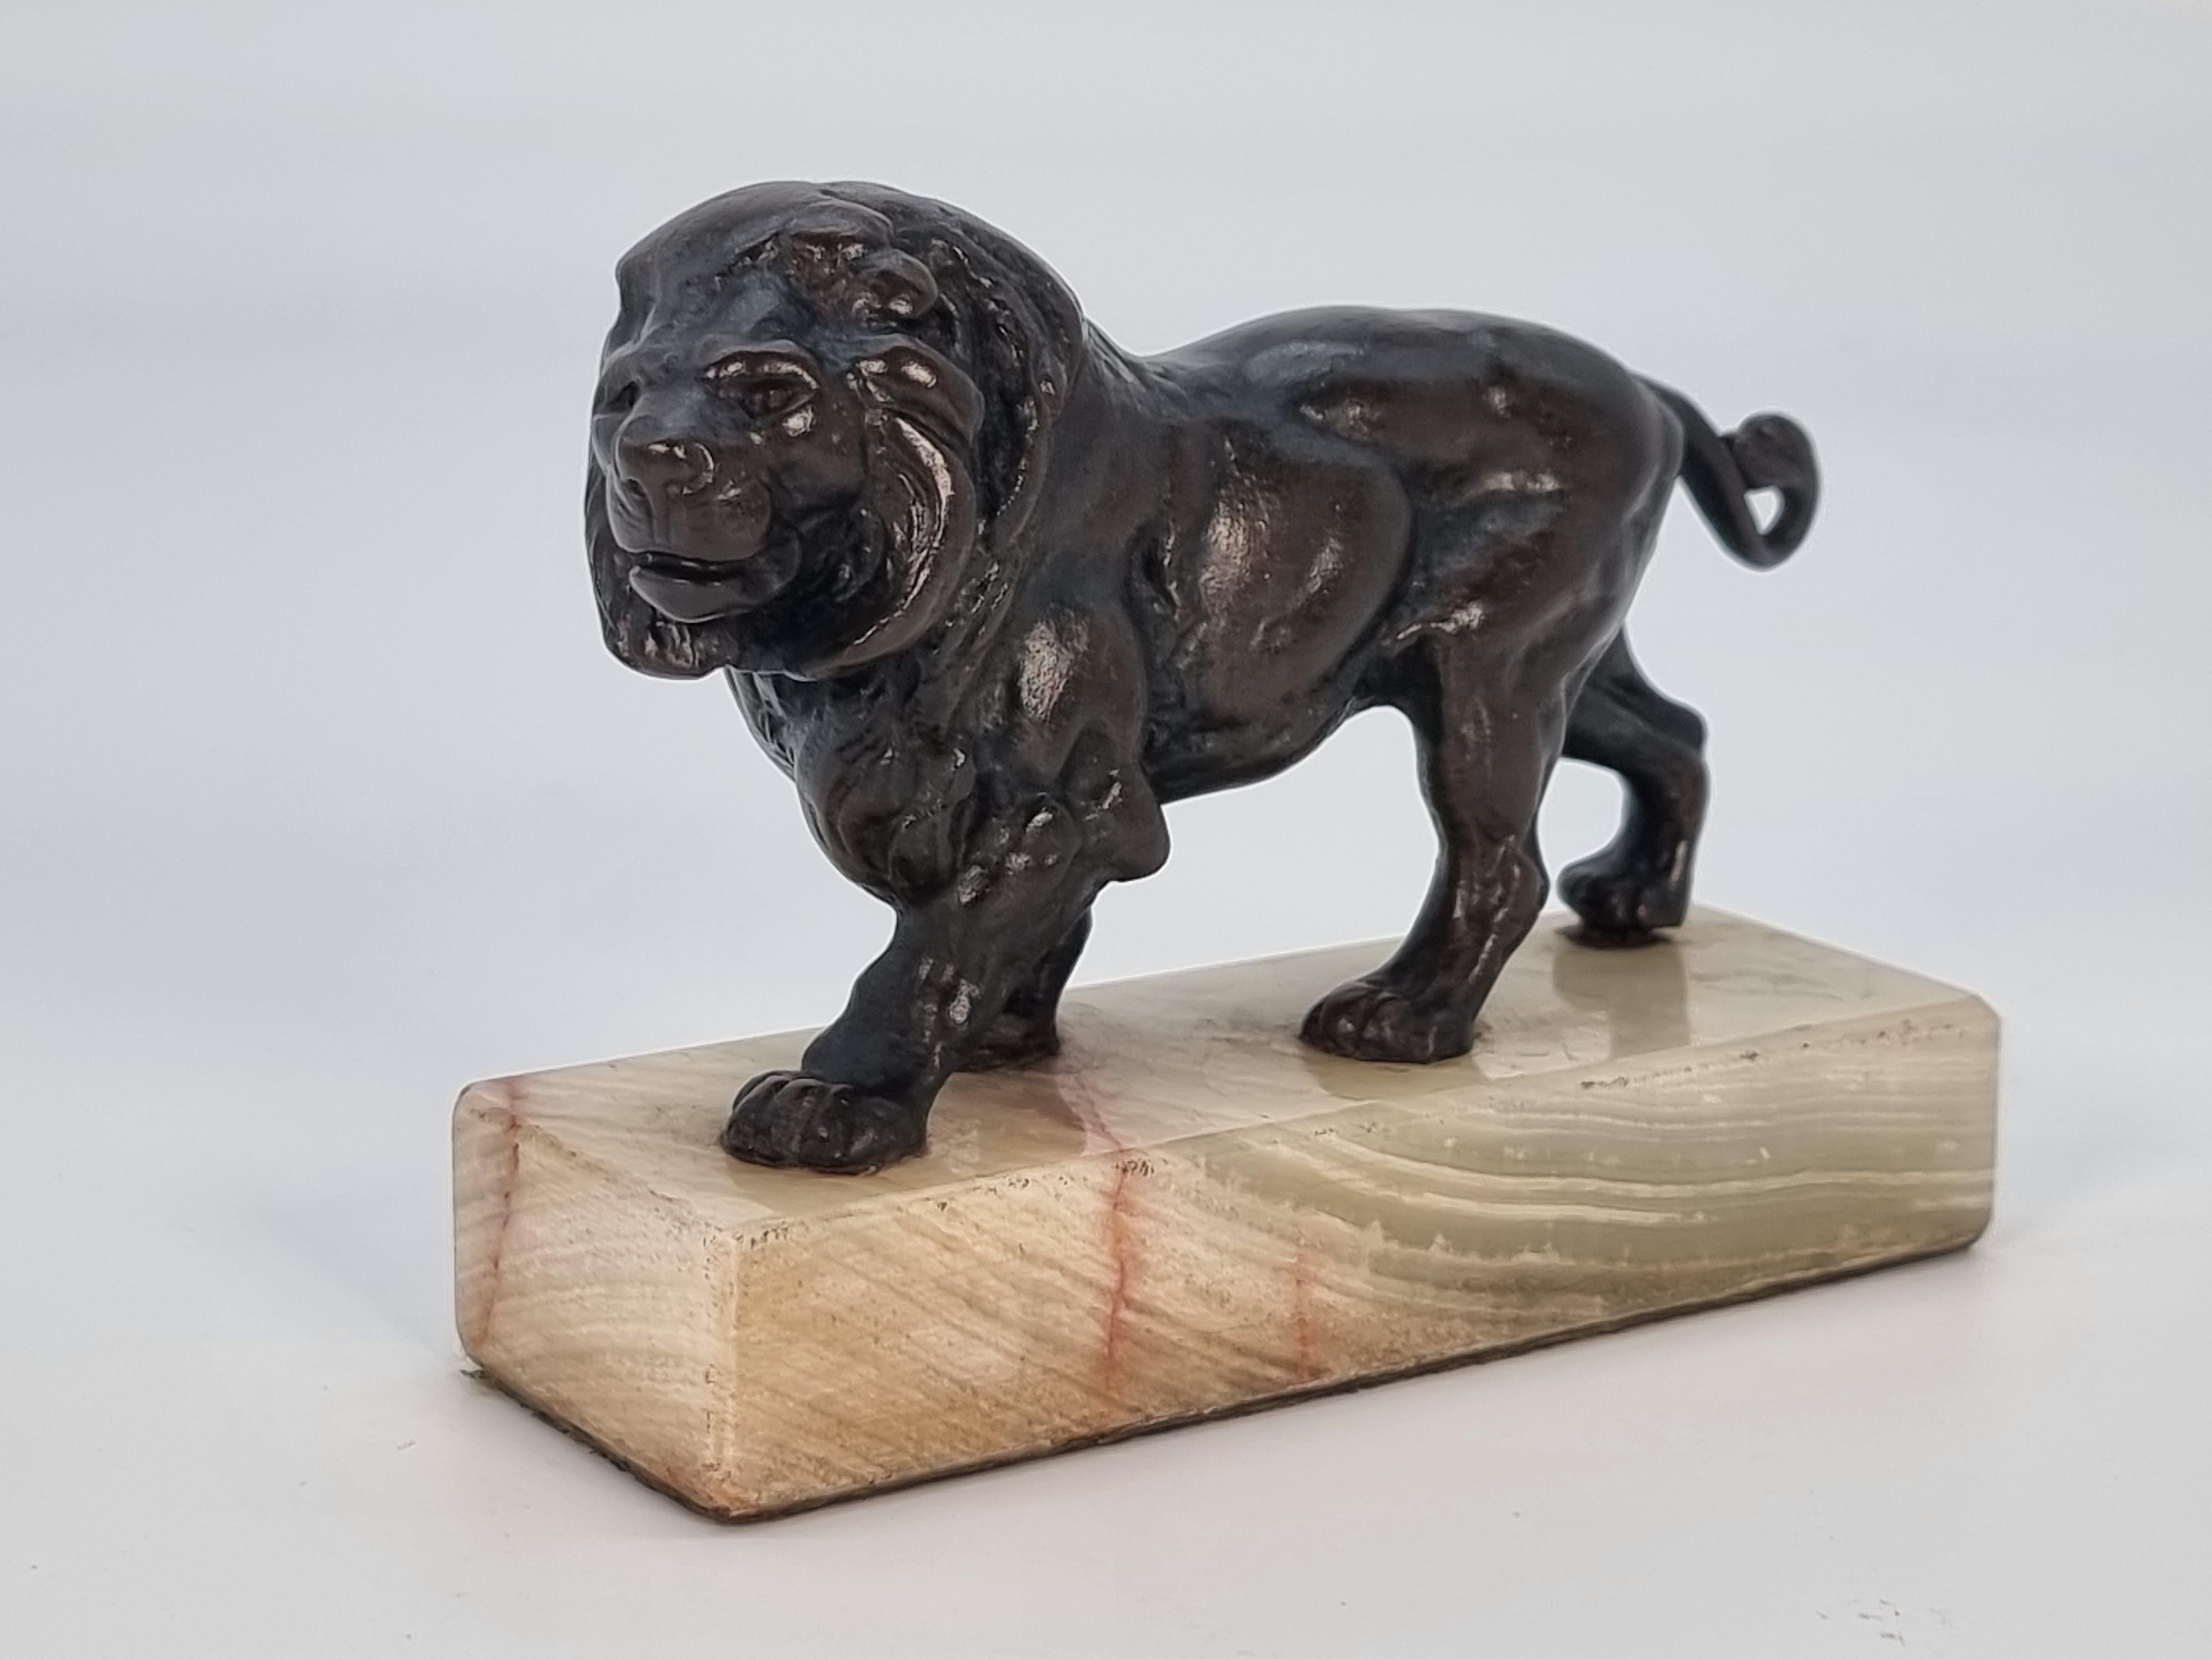 This superbly detailed fine bronze study depicts a male prowling lion. His body ripples with his muscular physique as he moves forward on large clawed paws. His head is framed with a full curly mane and he has a well defined face.

This lovely